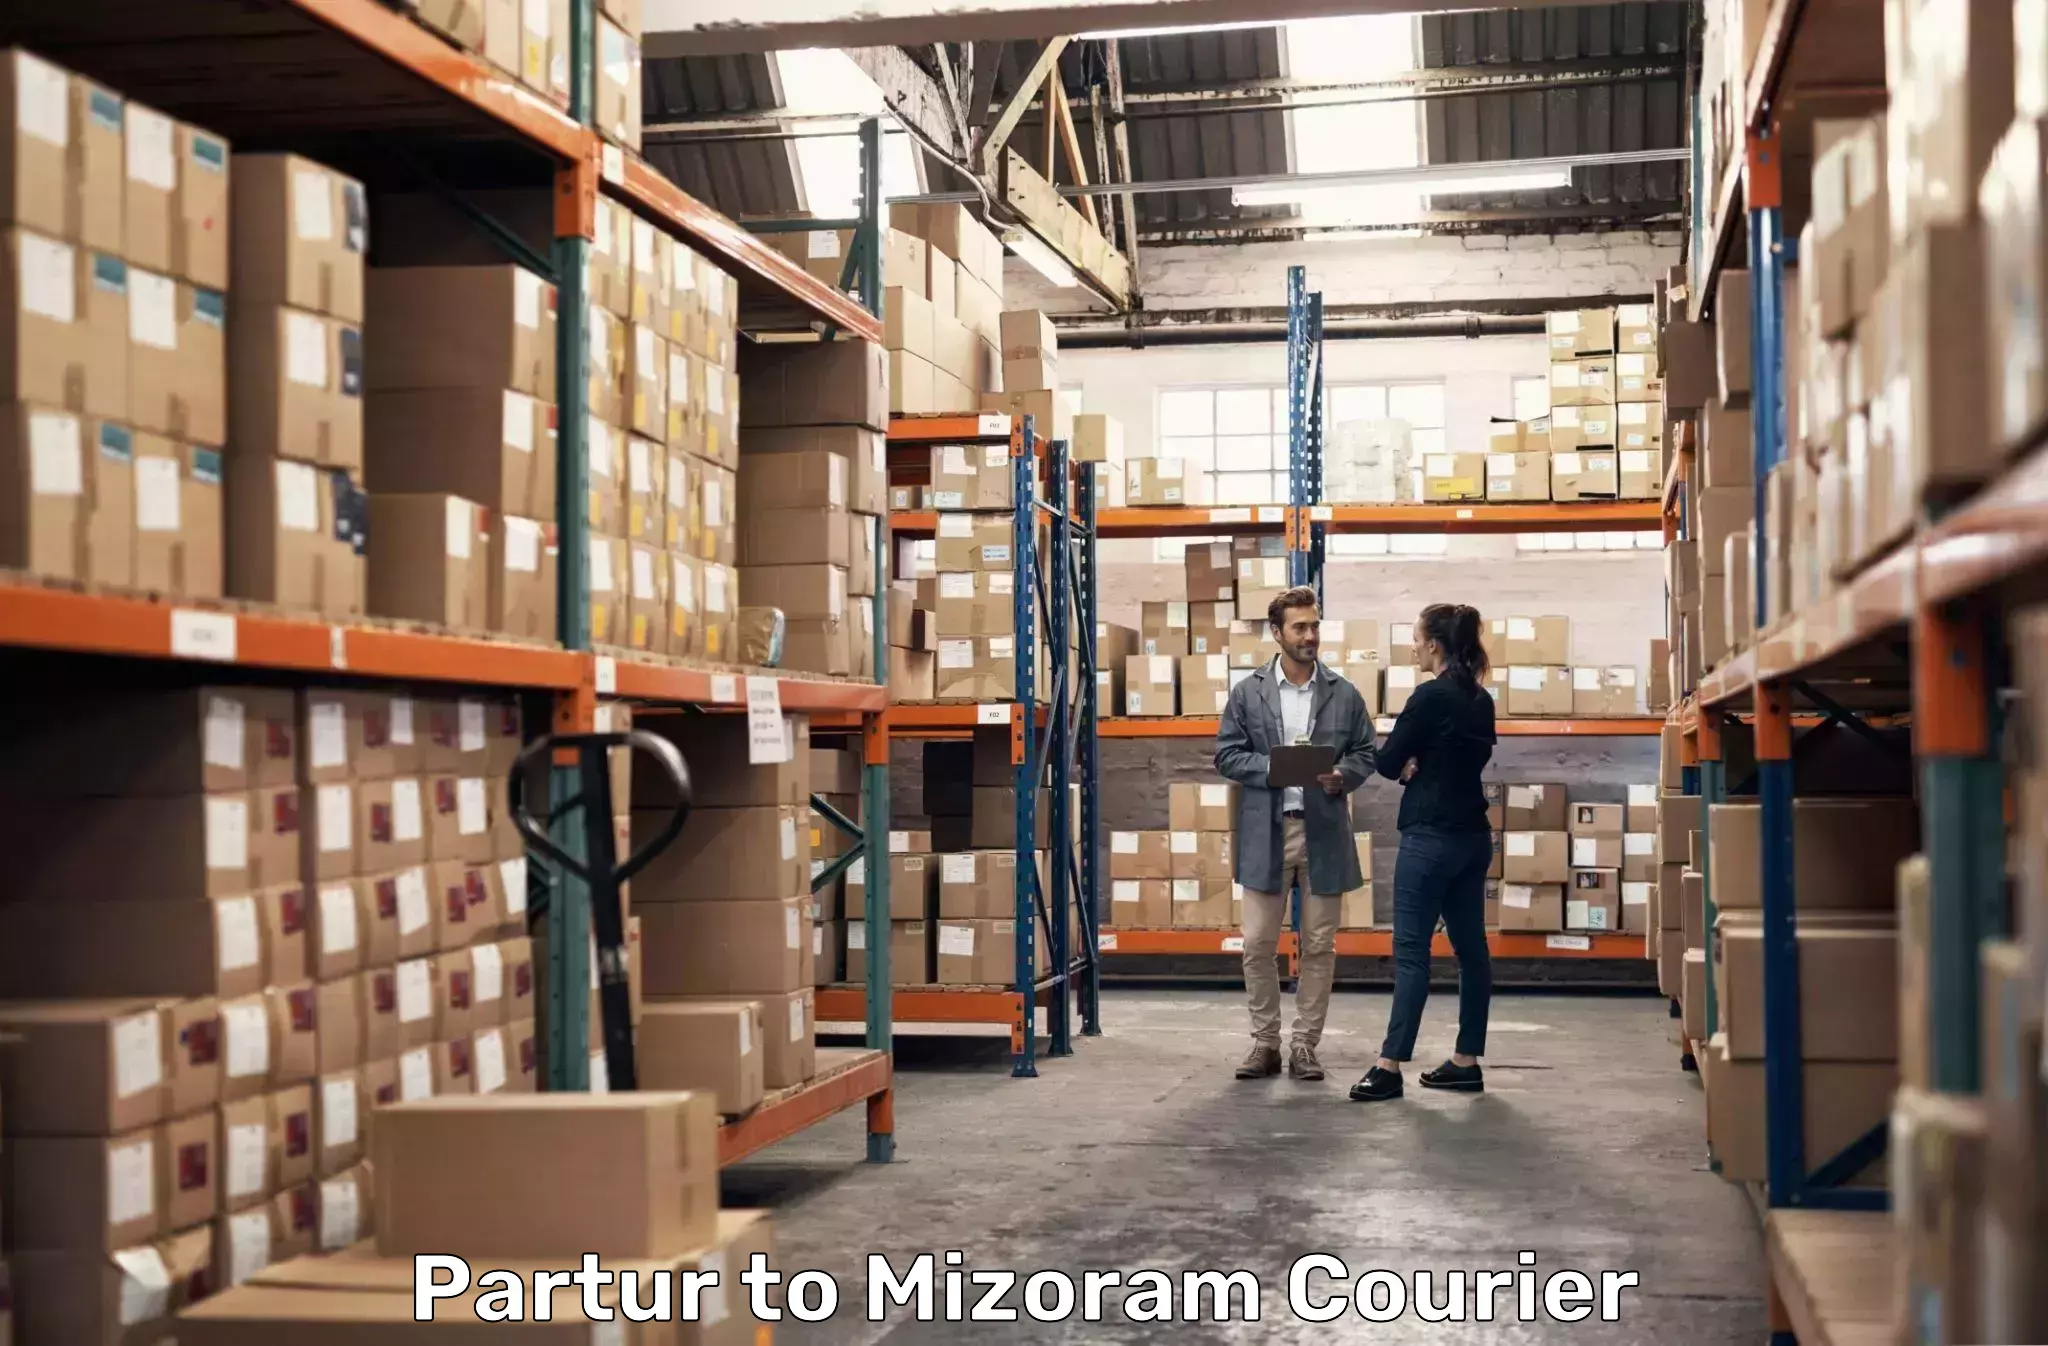 Nationwide shipping services Partur to Mizoram